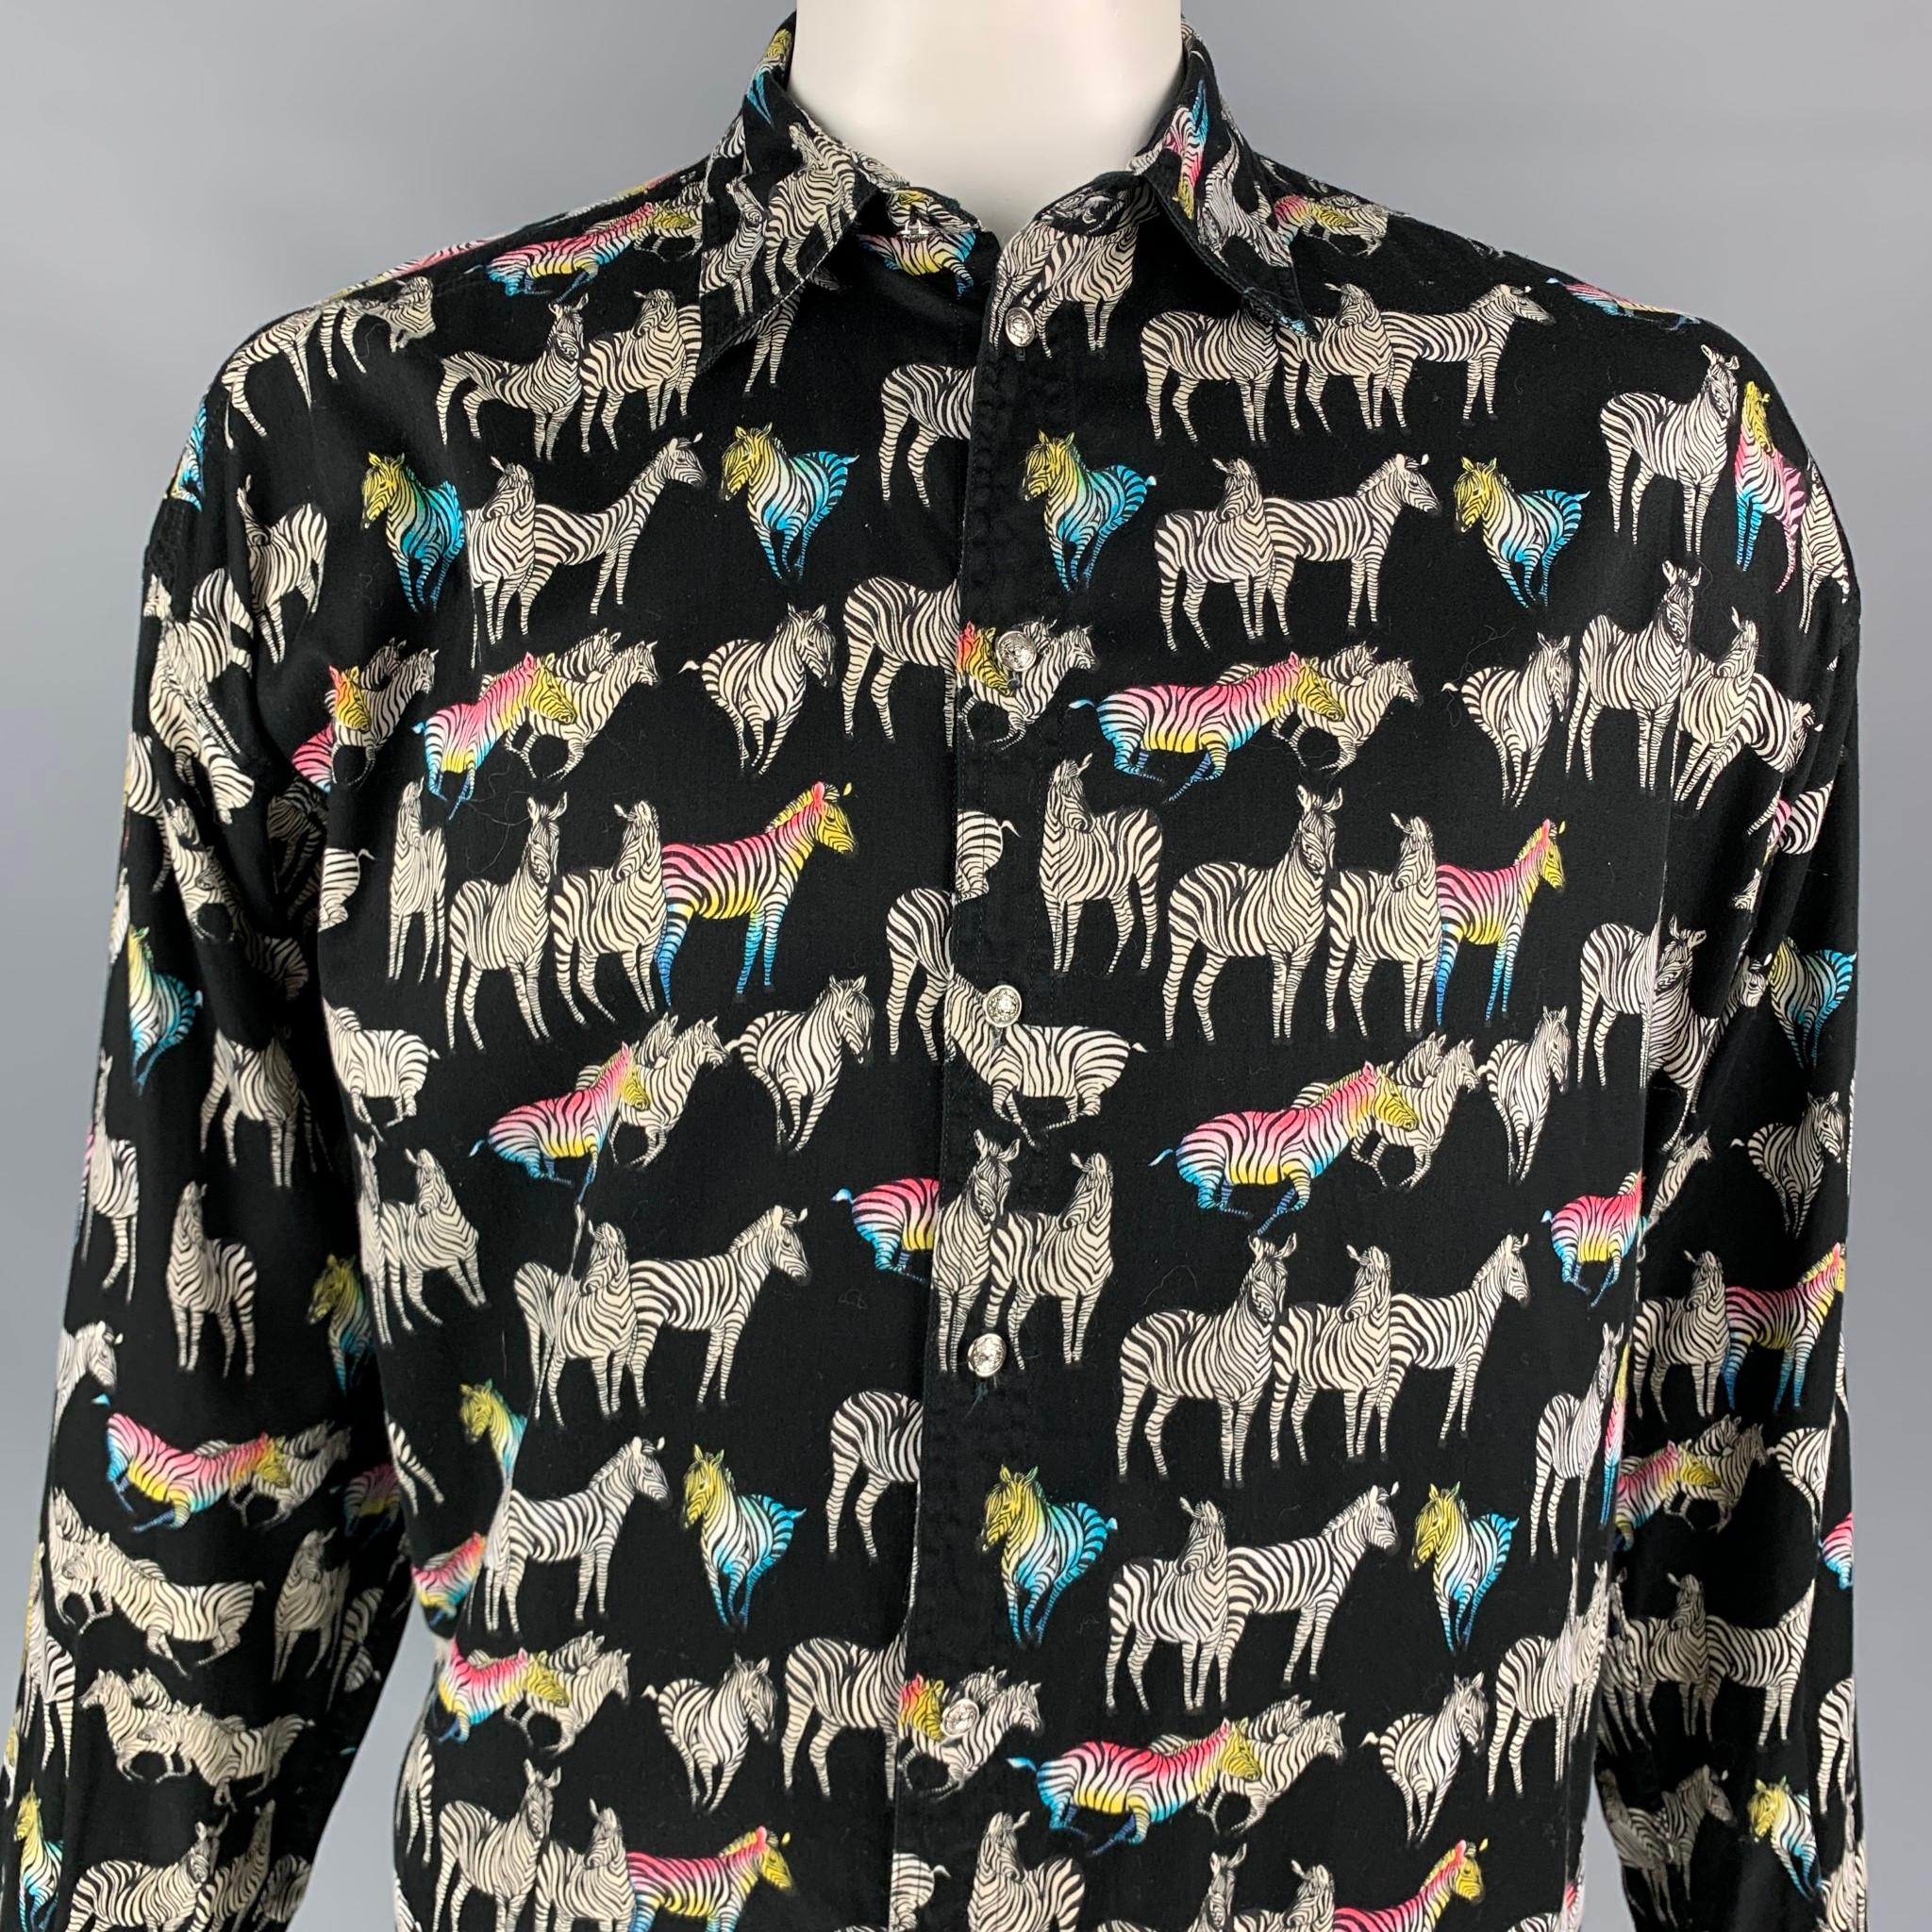 Vintage VERSACE JEANS COUTURE long sleeve shirt comes in a black & white zebra print cotton featuring a spread collar and a silver tone medusa head button up closure. Made in Italy.

Very Good Pre-Owned Condition.
Marked: L

Measurements:

Shoulder: